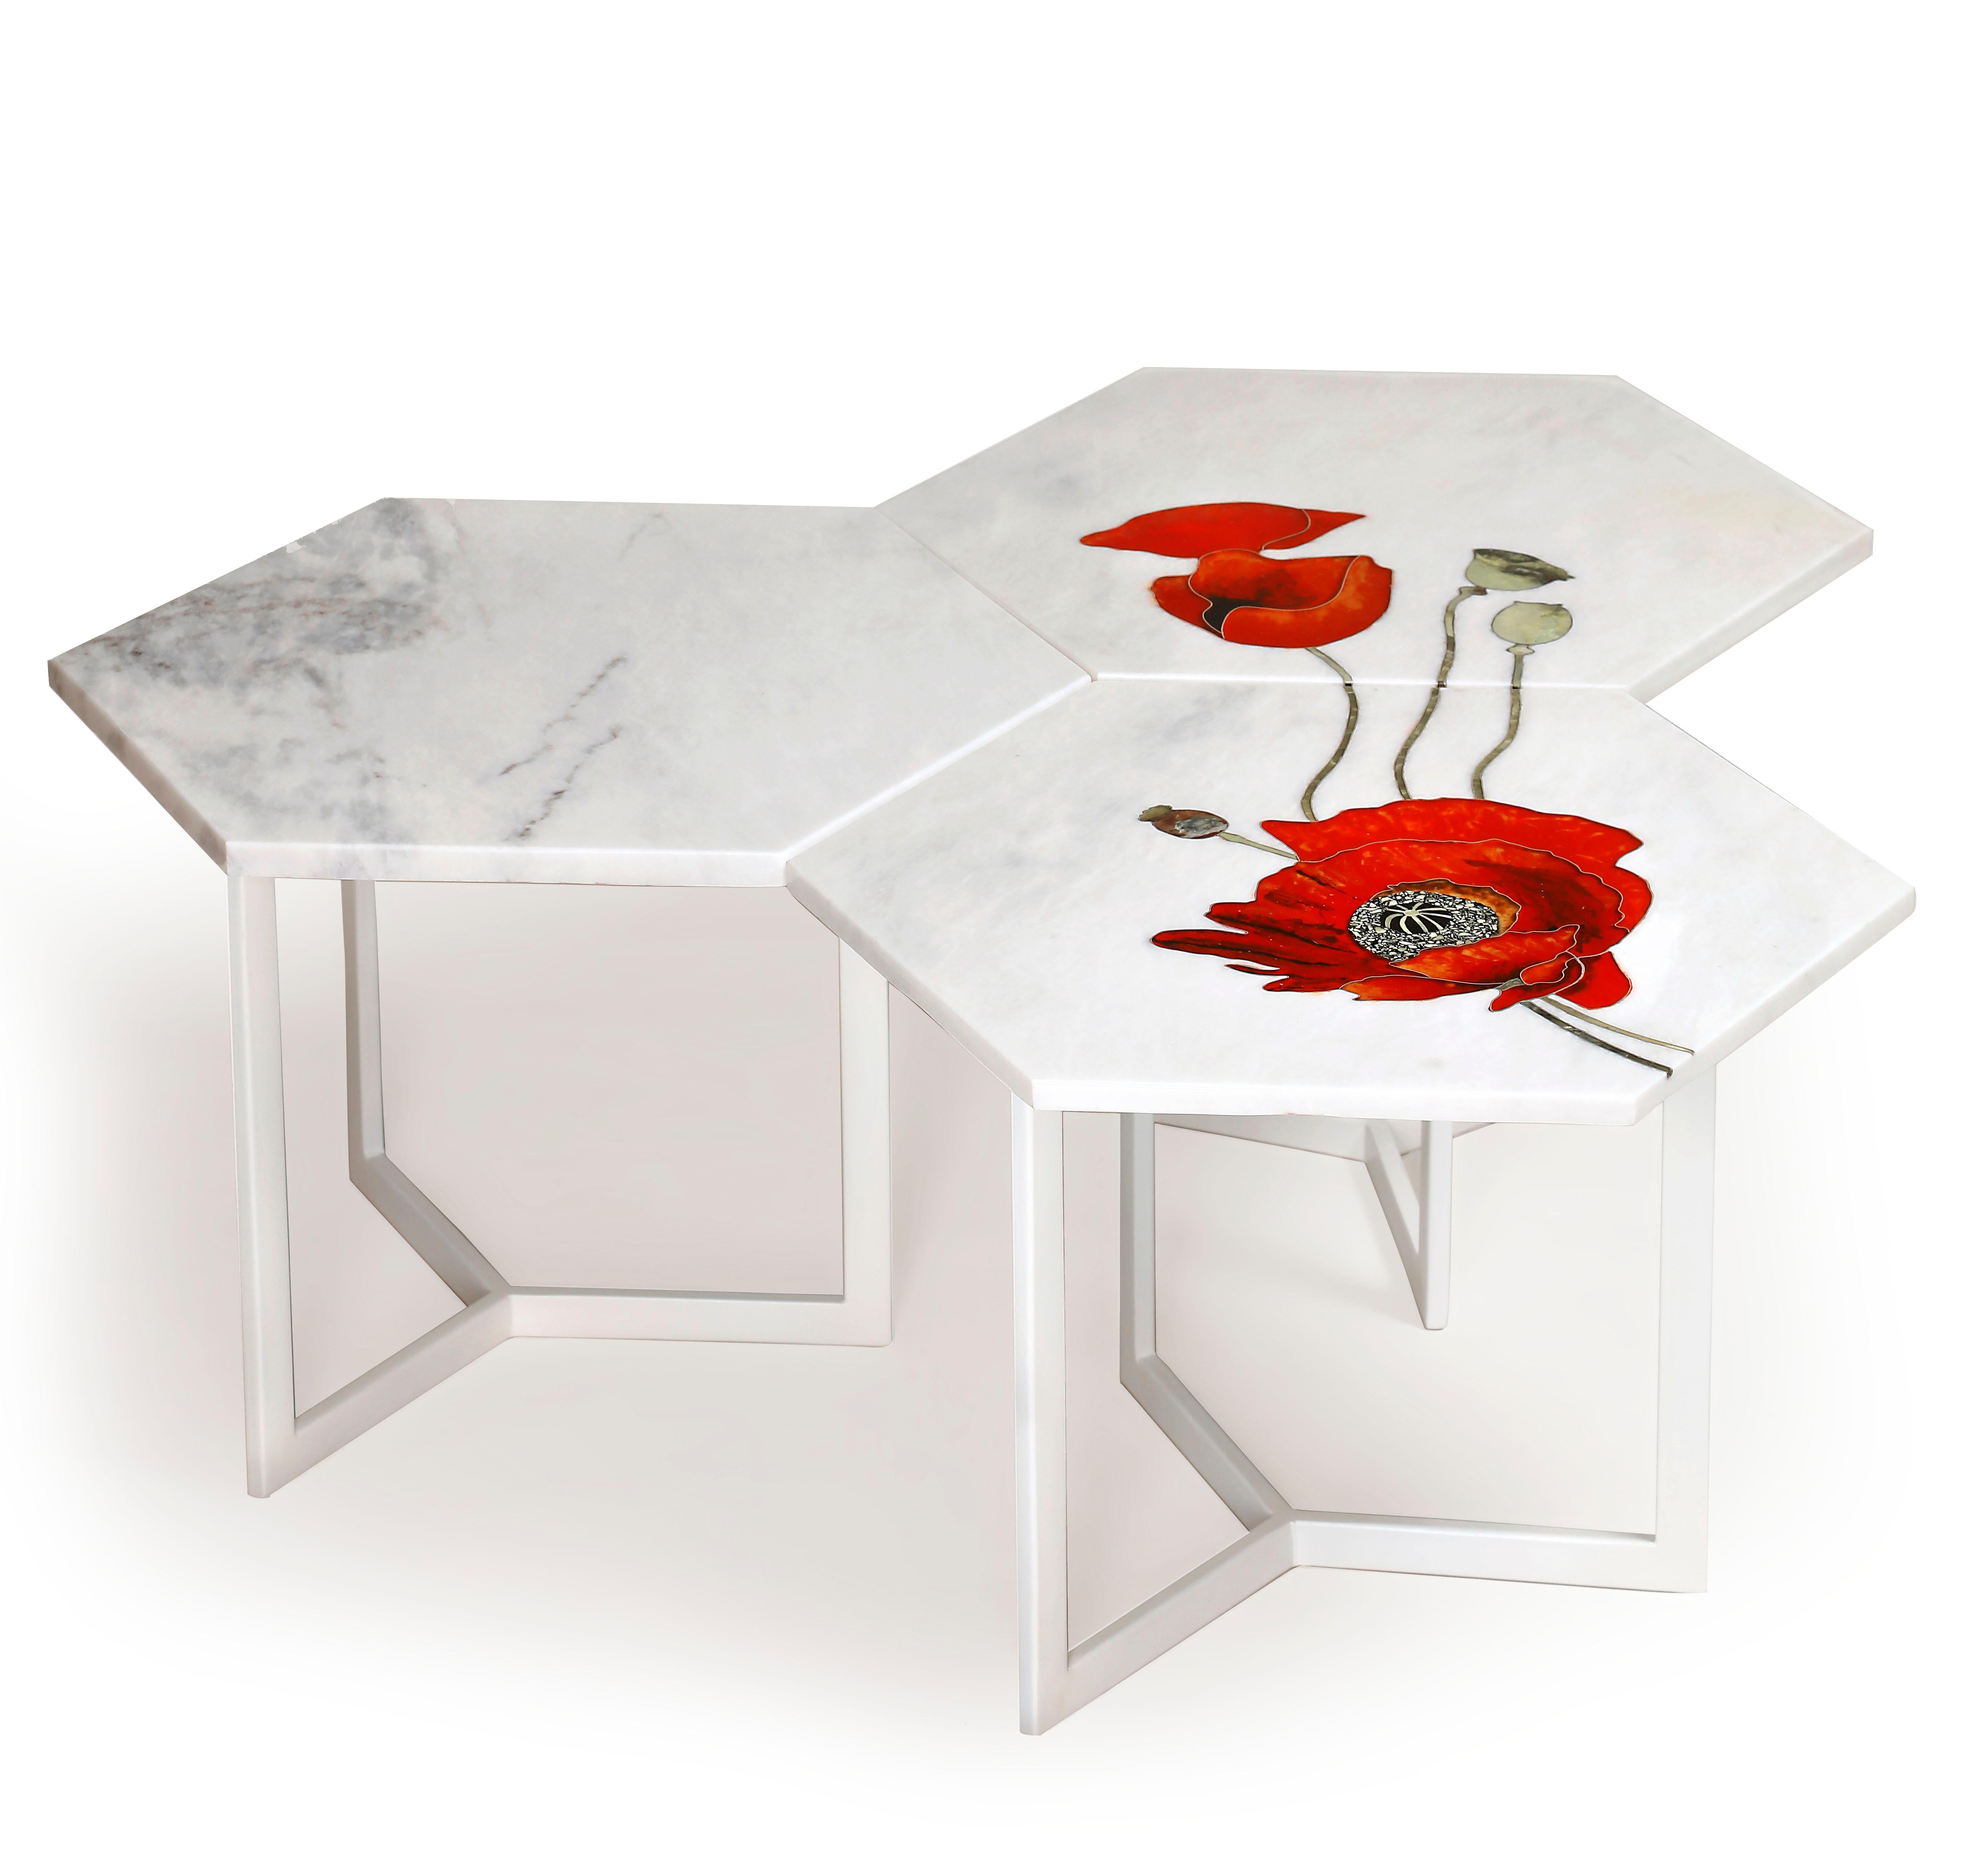 Reidi Modular Tables by Studio Lel
Dimensions: D59 x W59 x H41 cm each module
Materials: Serpentine, Resin, Marble, Metal

The Reidi Collection takes its name from the Persian word for the poppy flower - marrying traditional craft techniques